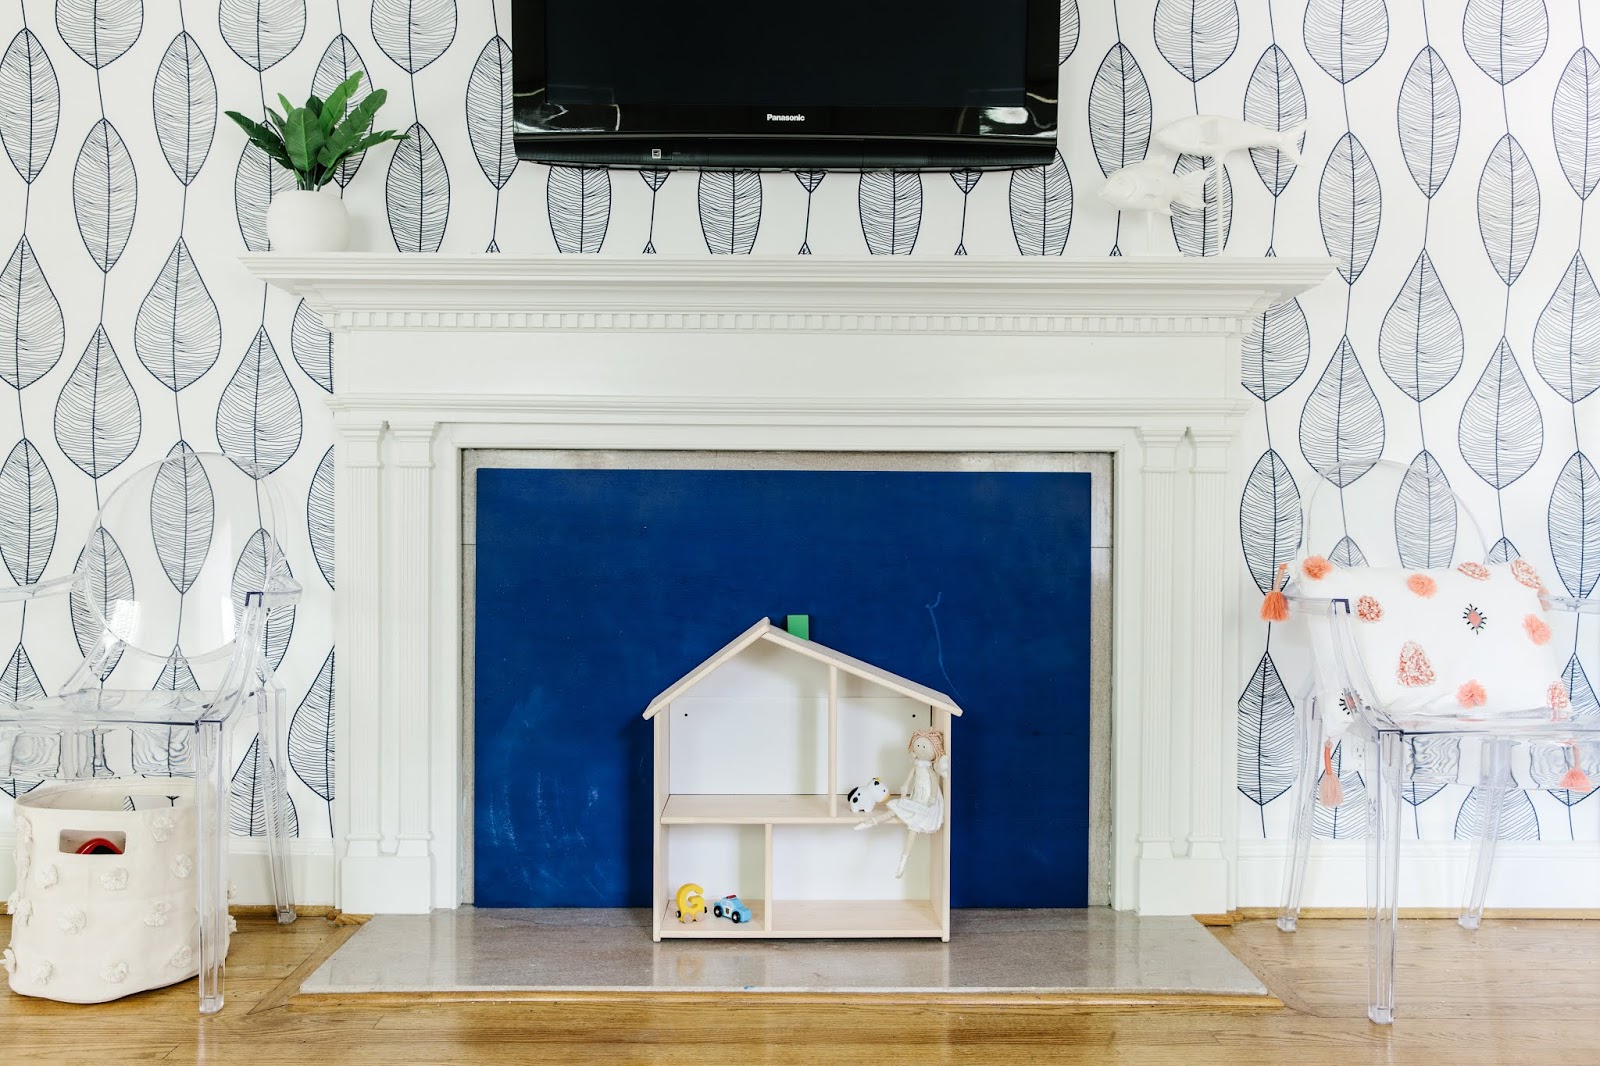 DIY Chalkboard Fireplace Cover: perfect for babyproofing! 